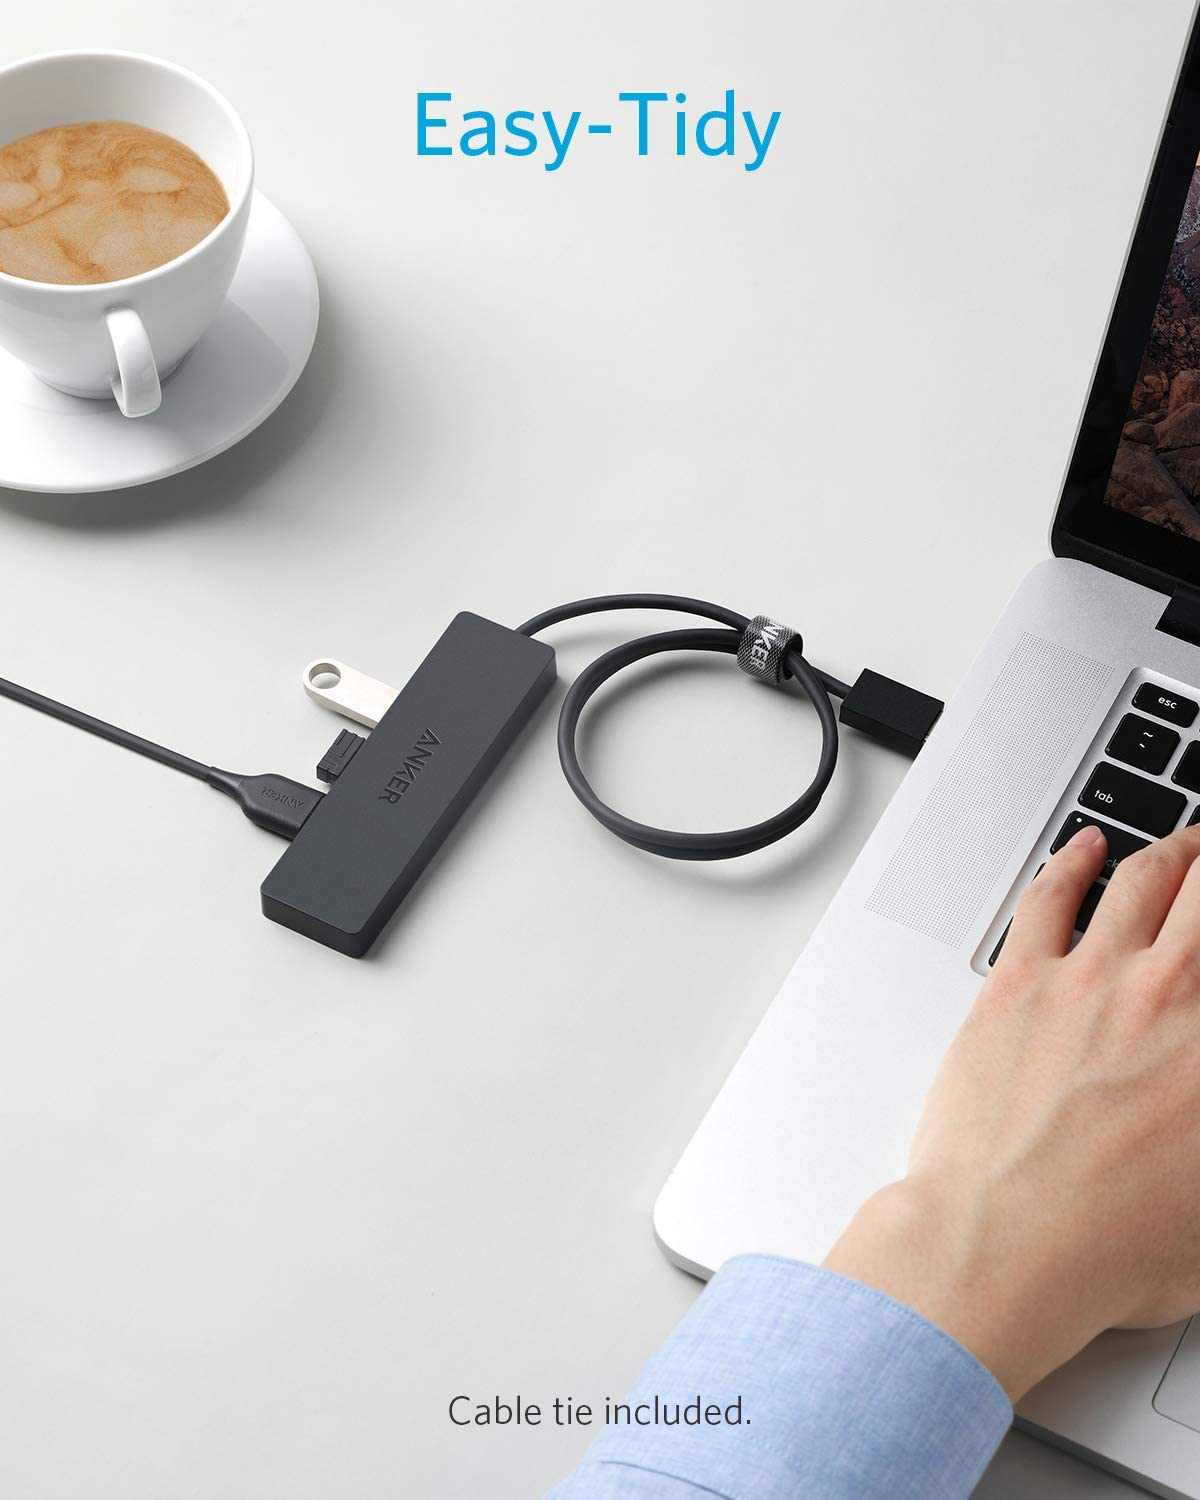 Anker 4-Port USB 3.0 Hub, Ultra-Slim Data USB Hub with 2 Ft Extended Cable [Charging Not Supported], for Macbook, Mac Pro, Mac Mini, Imac, Surface Pro, XPS, PC, Flash Drive, Mobile HDD Animals & Pet Supplies > Pet Supplies > Reptile & Amphibian Supplies > Reptile & Amphibian Substrates Anker   